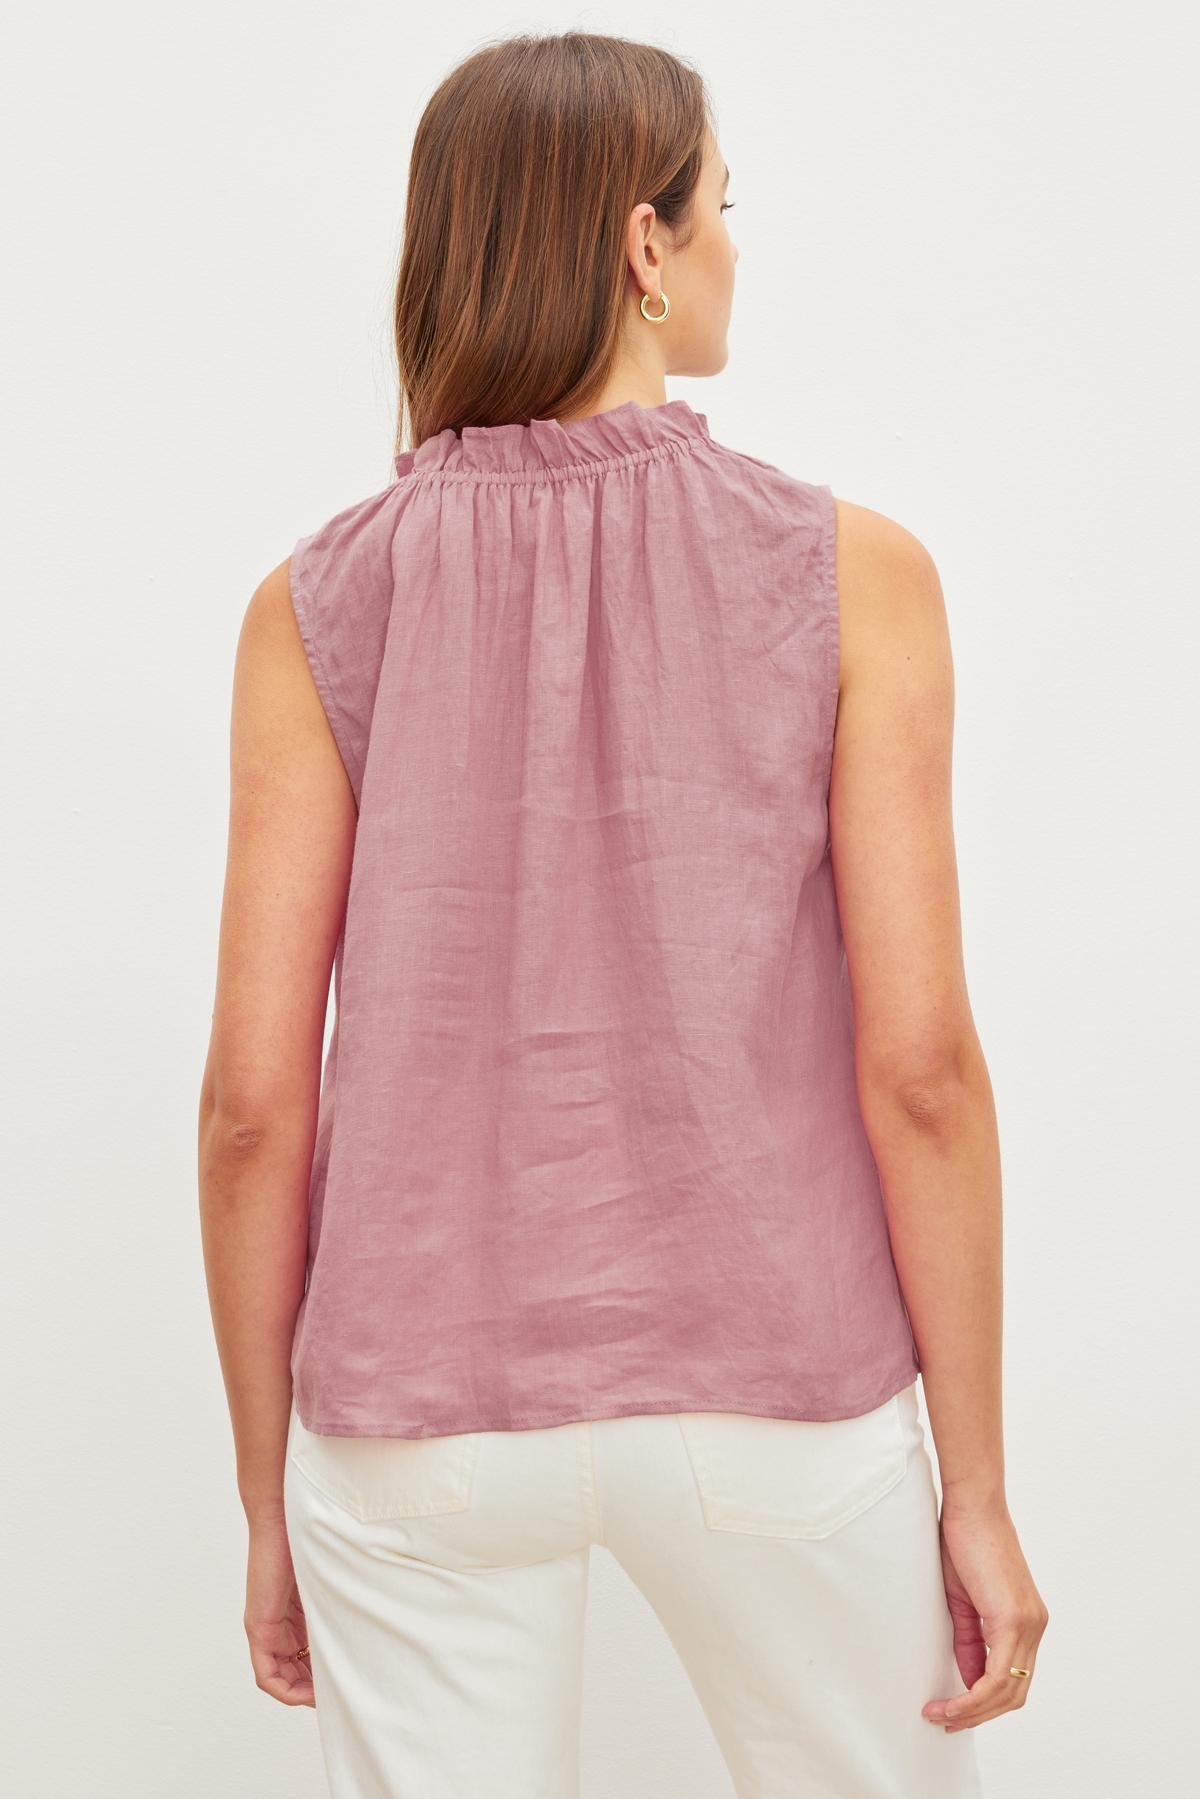 Woman standing with her back to the camera, wearing a Pink MASIE LINEN TANK TOP and white pants, against a plain background.-36571197440193